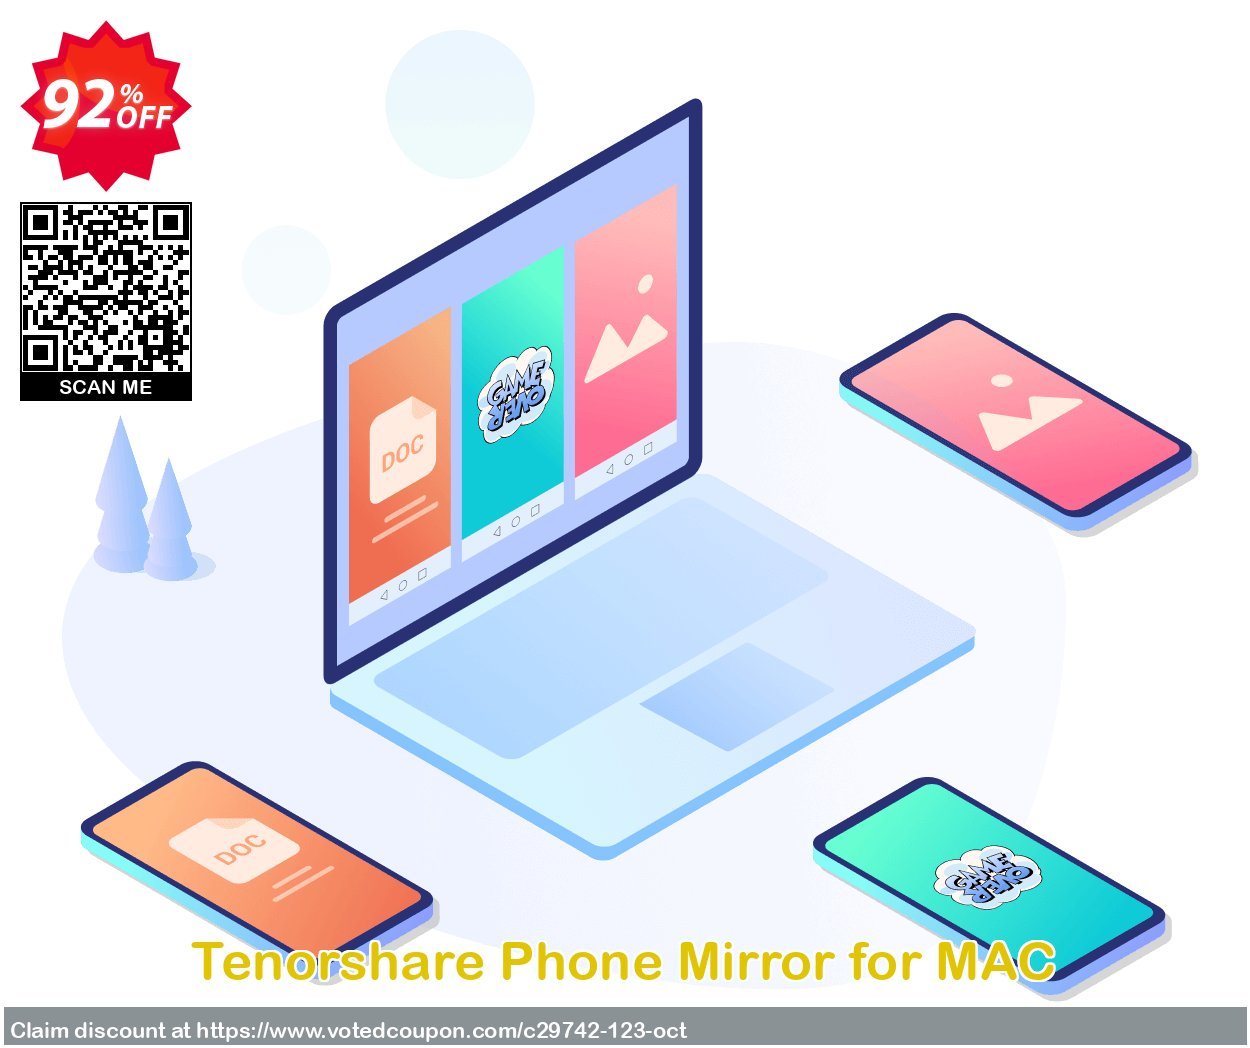 Tenorshare Phone Mirror for MAC Coupon, discount 90% OFF Tenorshare Phone Mirror for MAC, verified. Promotion: Stunning promo code of Tenorshare Phone Mirror for MAC, tested & approved